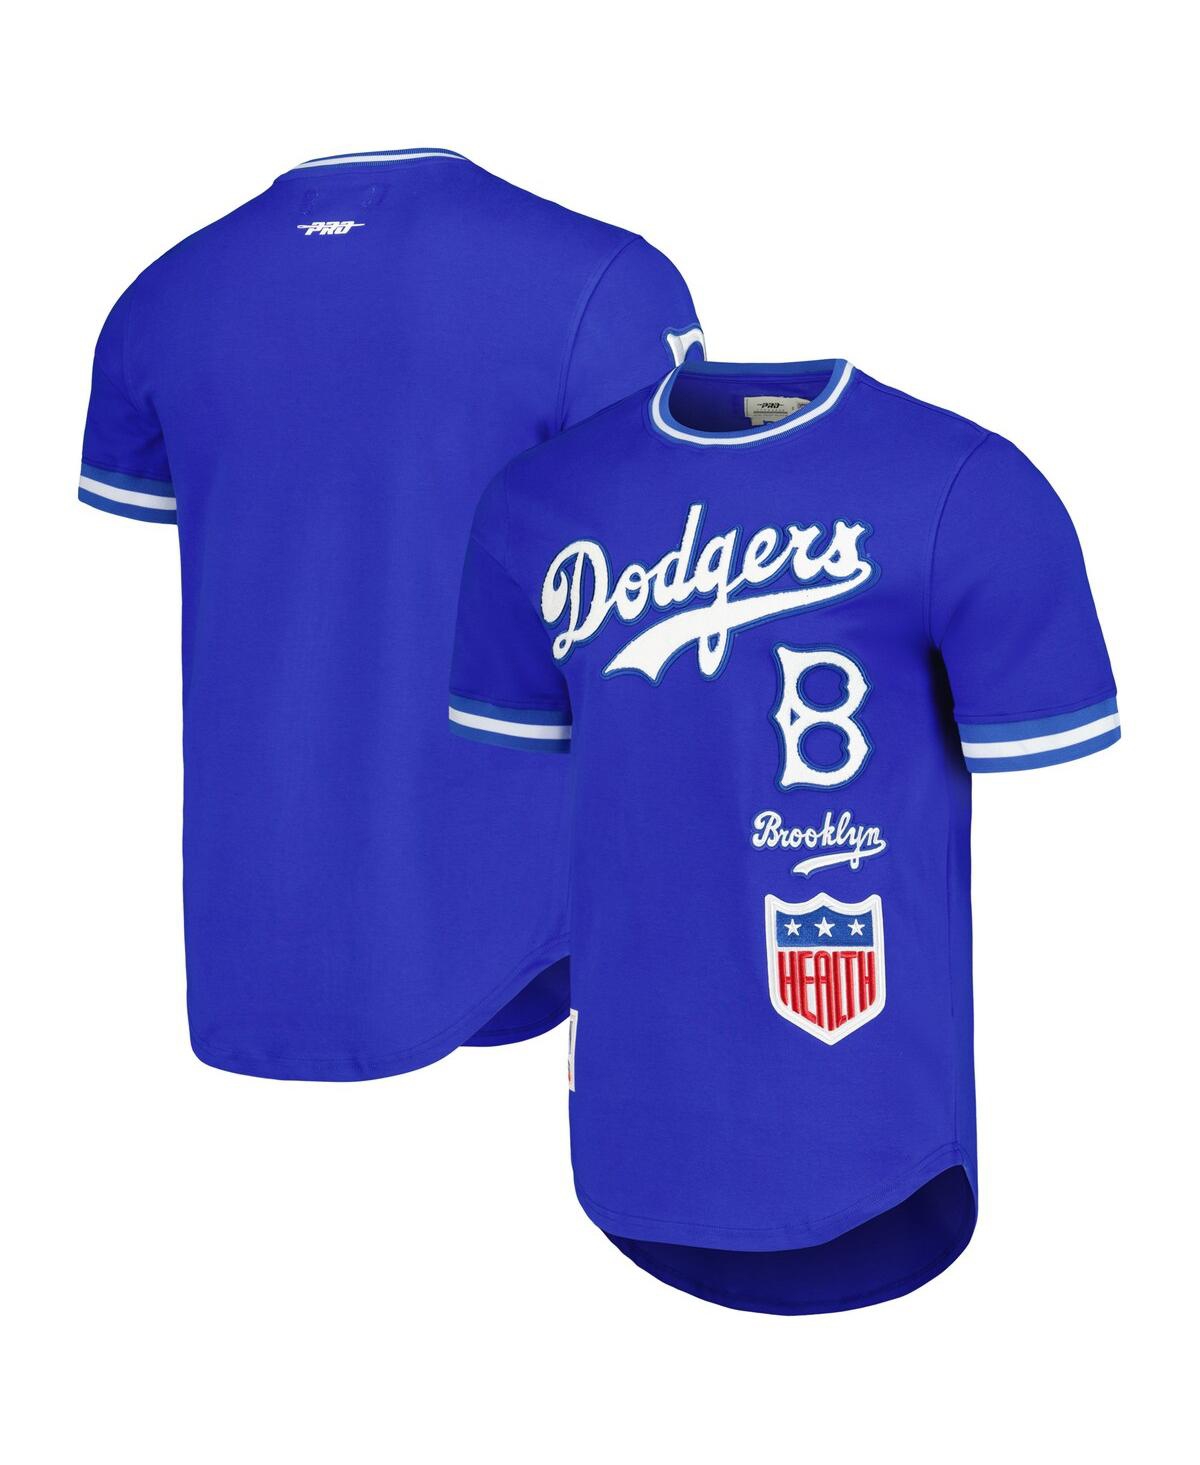 Shop Pro Standard Men's  Royal Brooklyn Dodgers Cooperstown Collection Retro Classic T-shirt